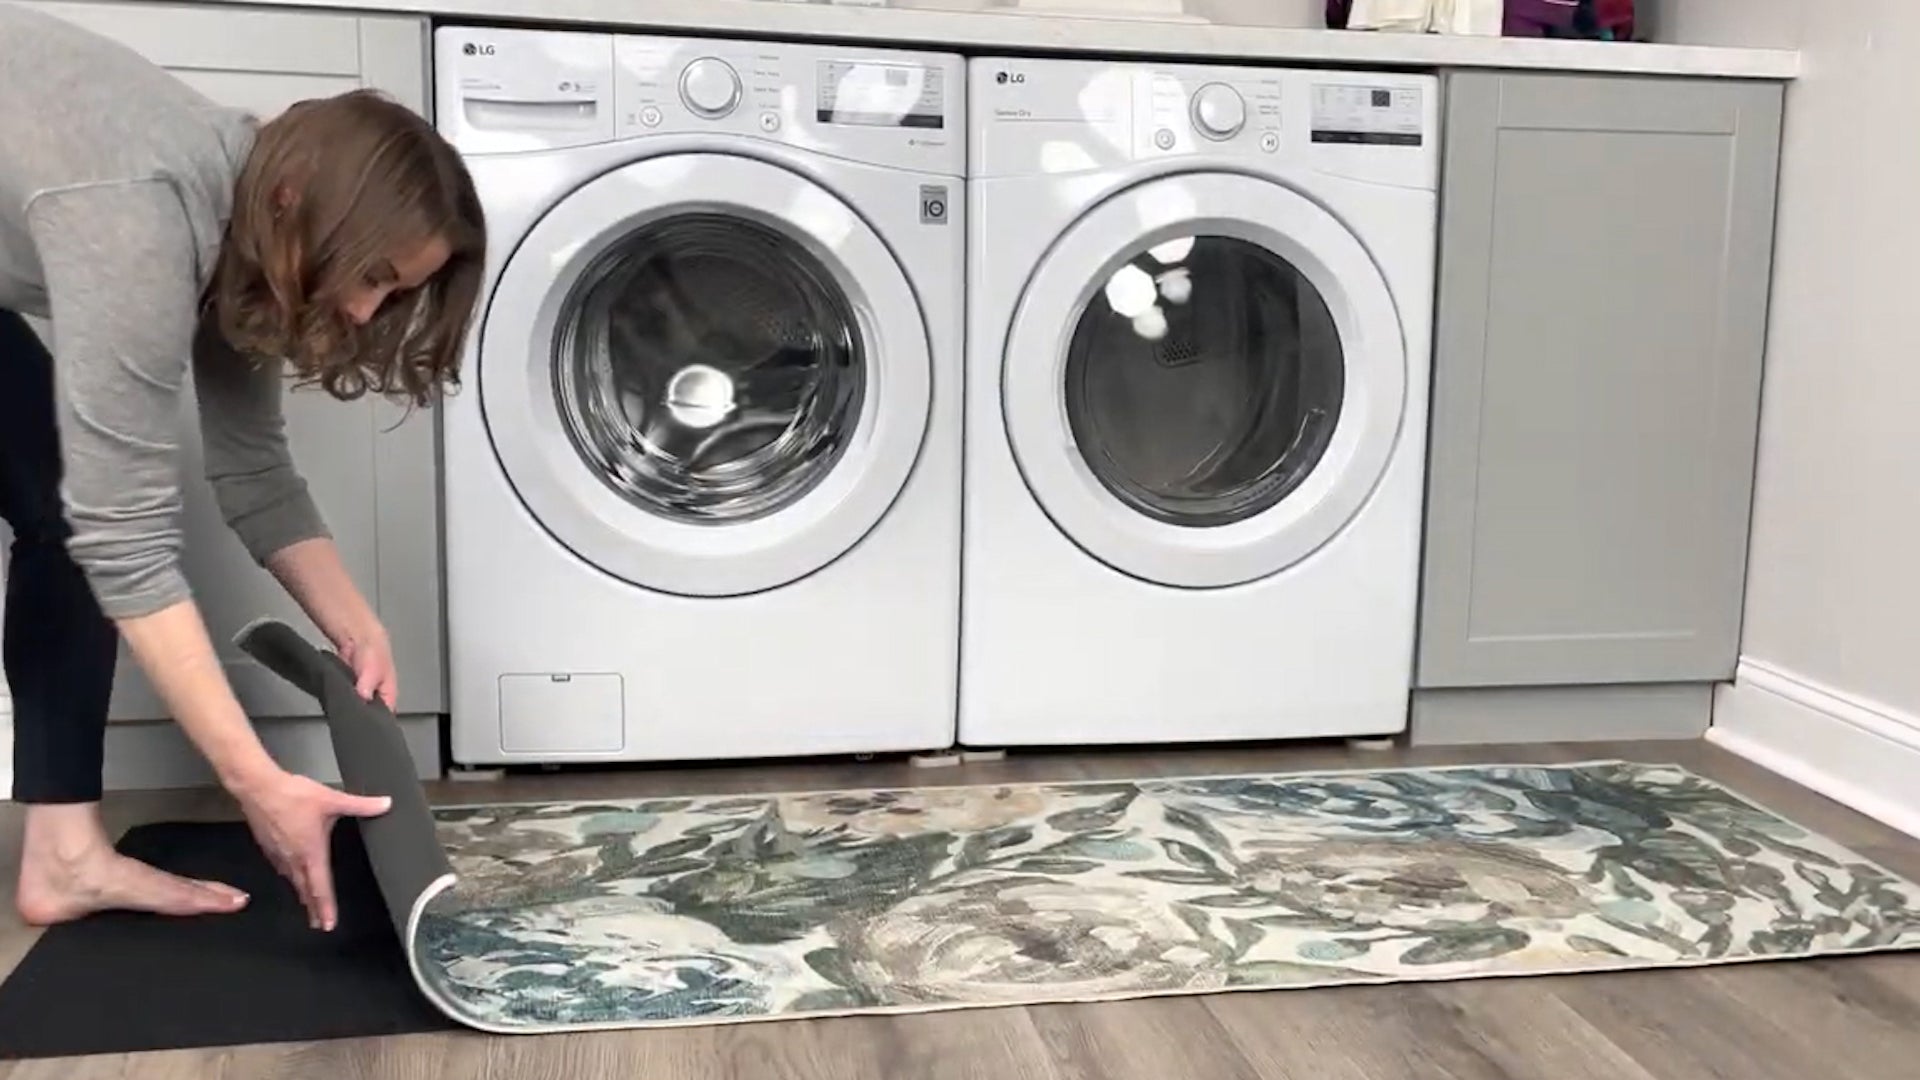 How to Machine Wash a Rug: A Guide from Heritage Park Laundry Essentials